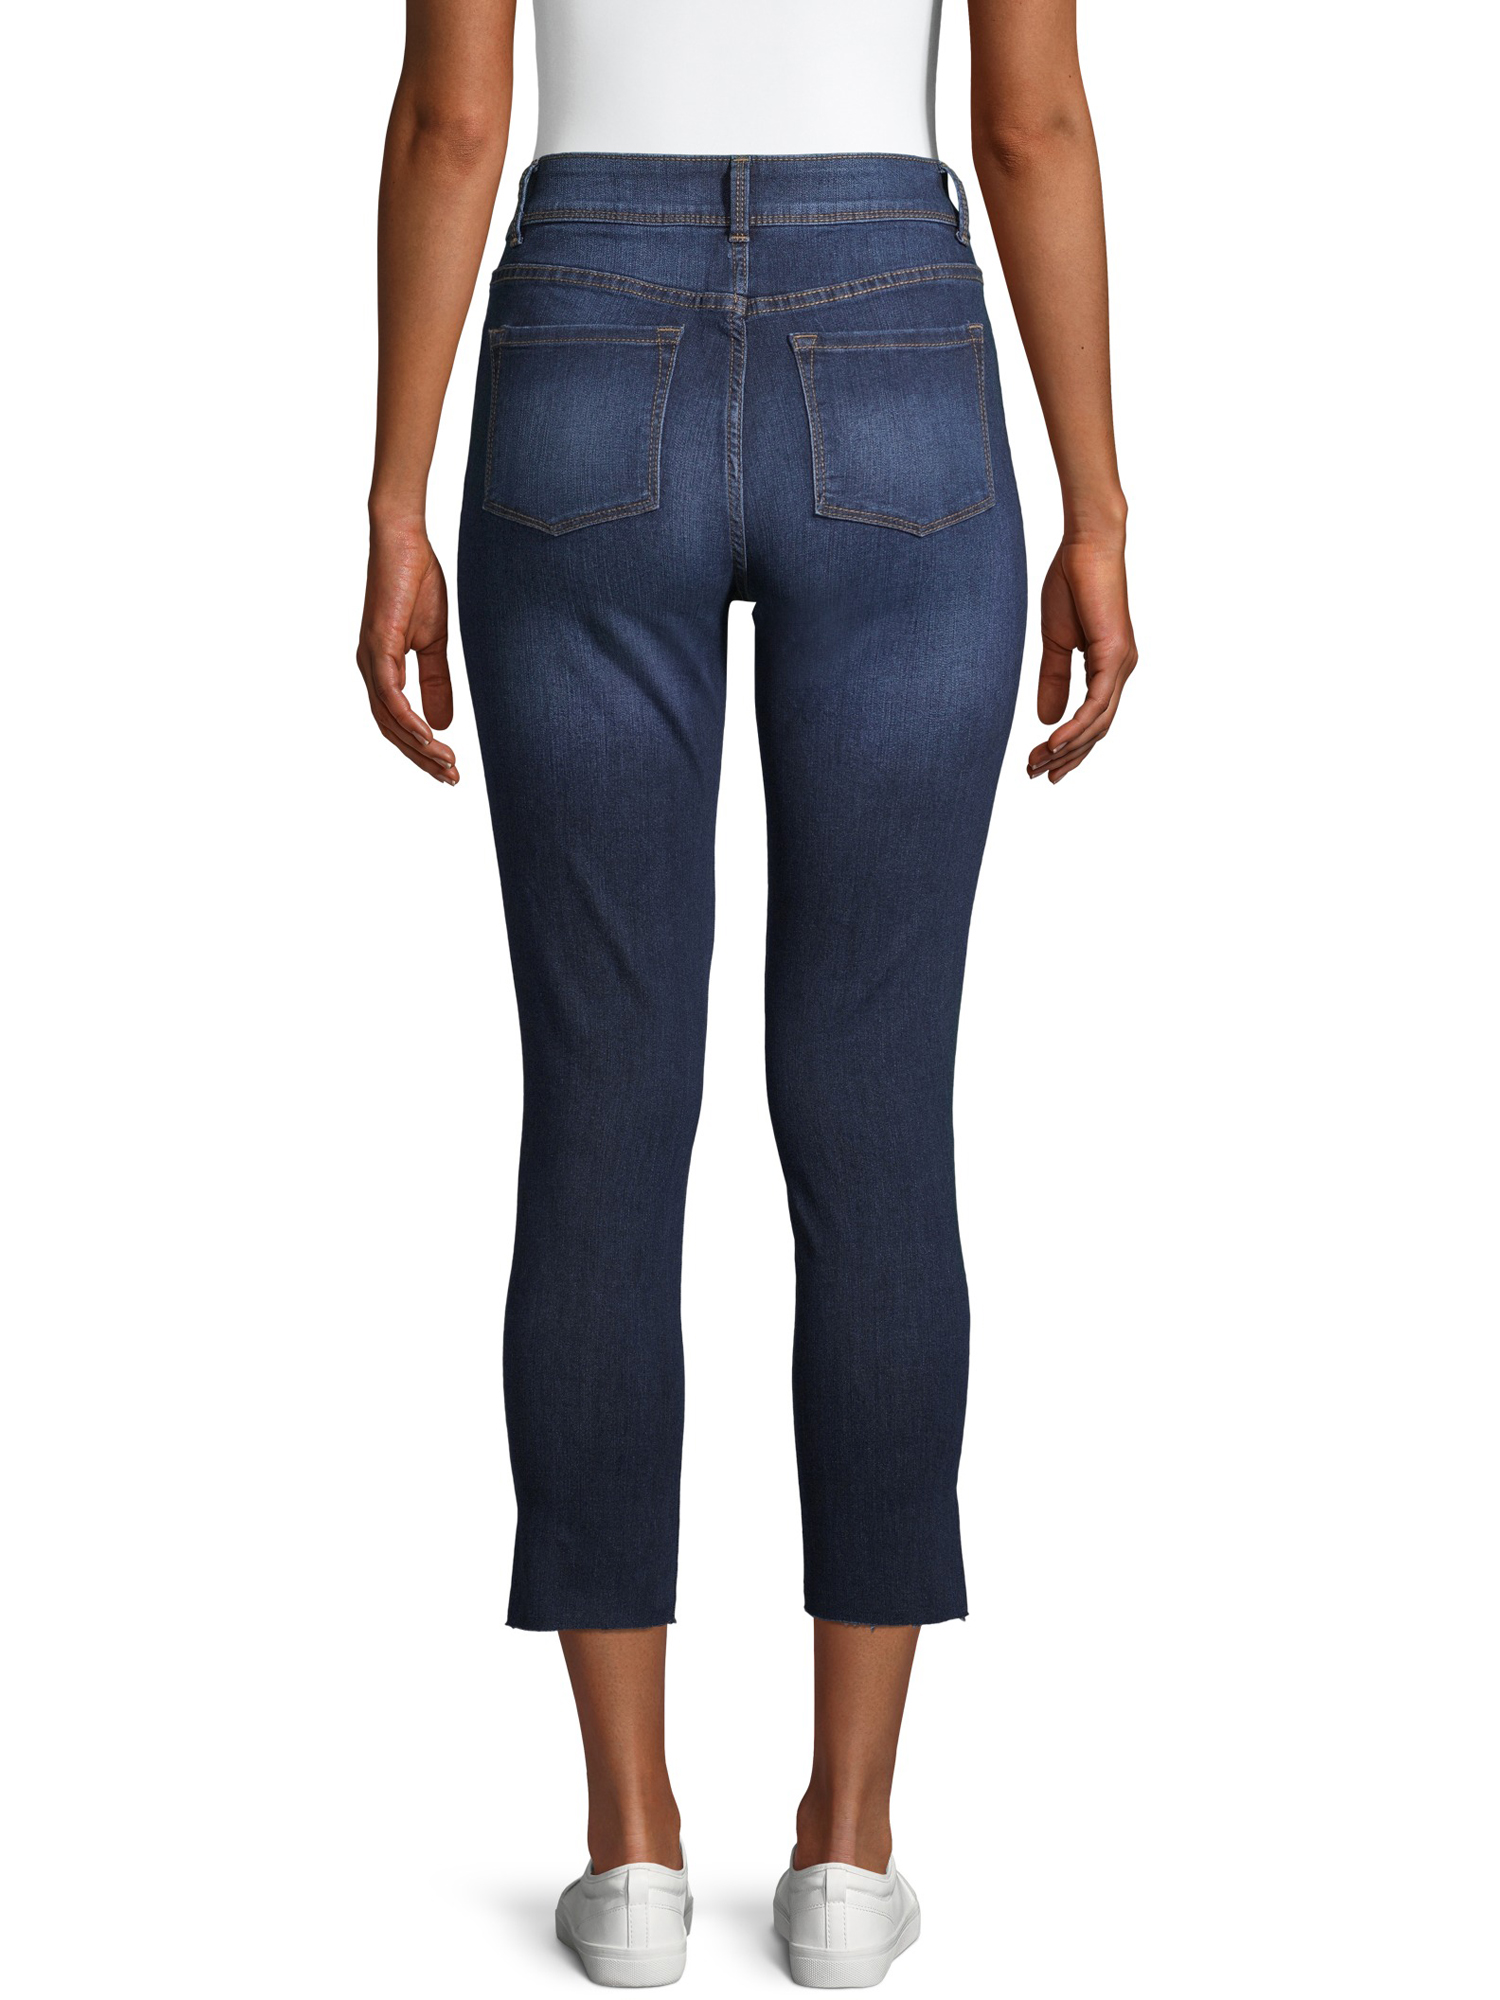 Time and Tru Women's High Rise Button Skinny Jeans - image 4 of 6